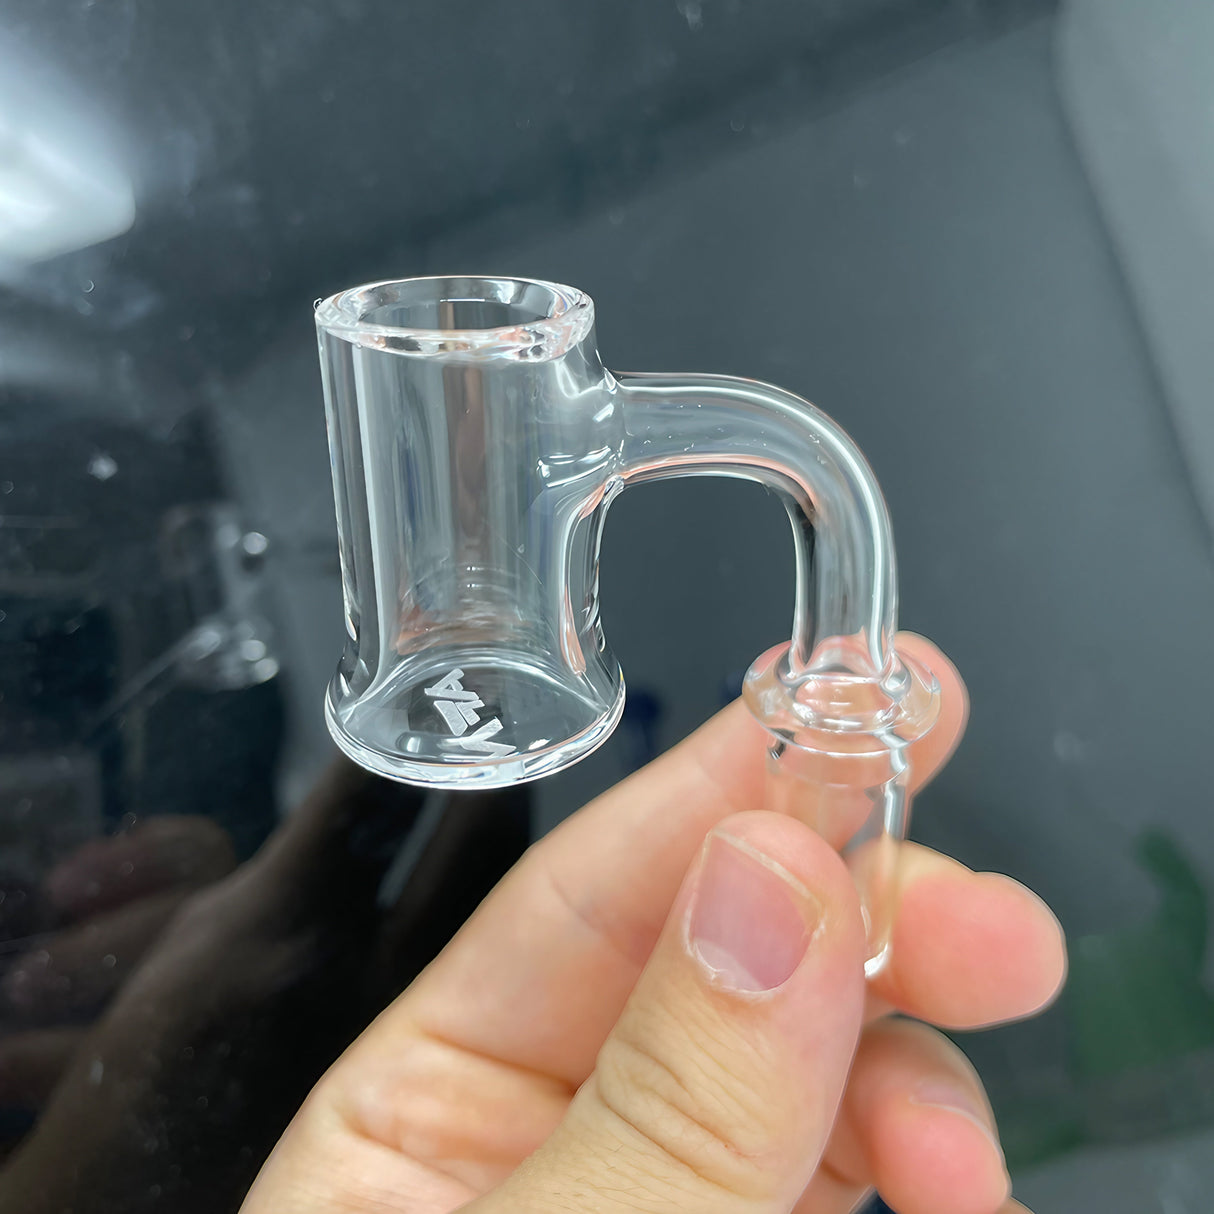 AFM Full Weld Bell Bottom 20mm Quartz Banger held in hand, clear view for concentrates